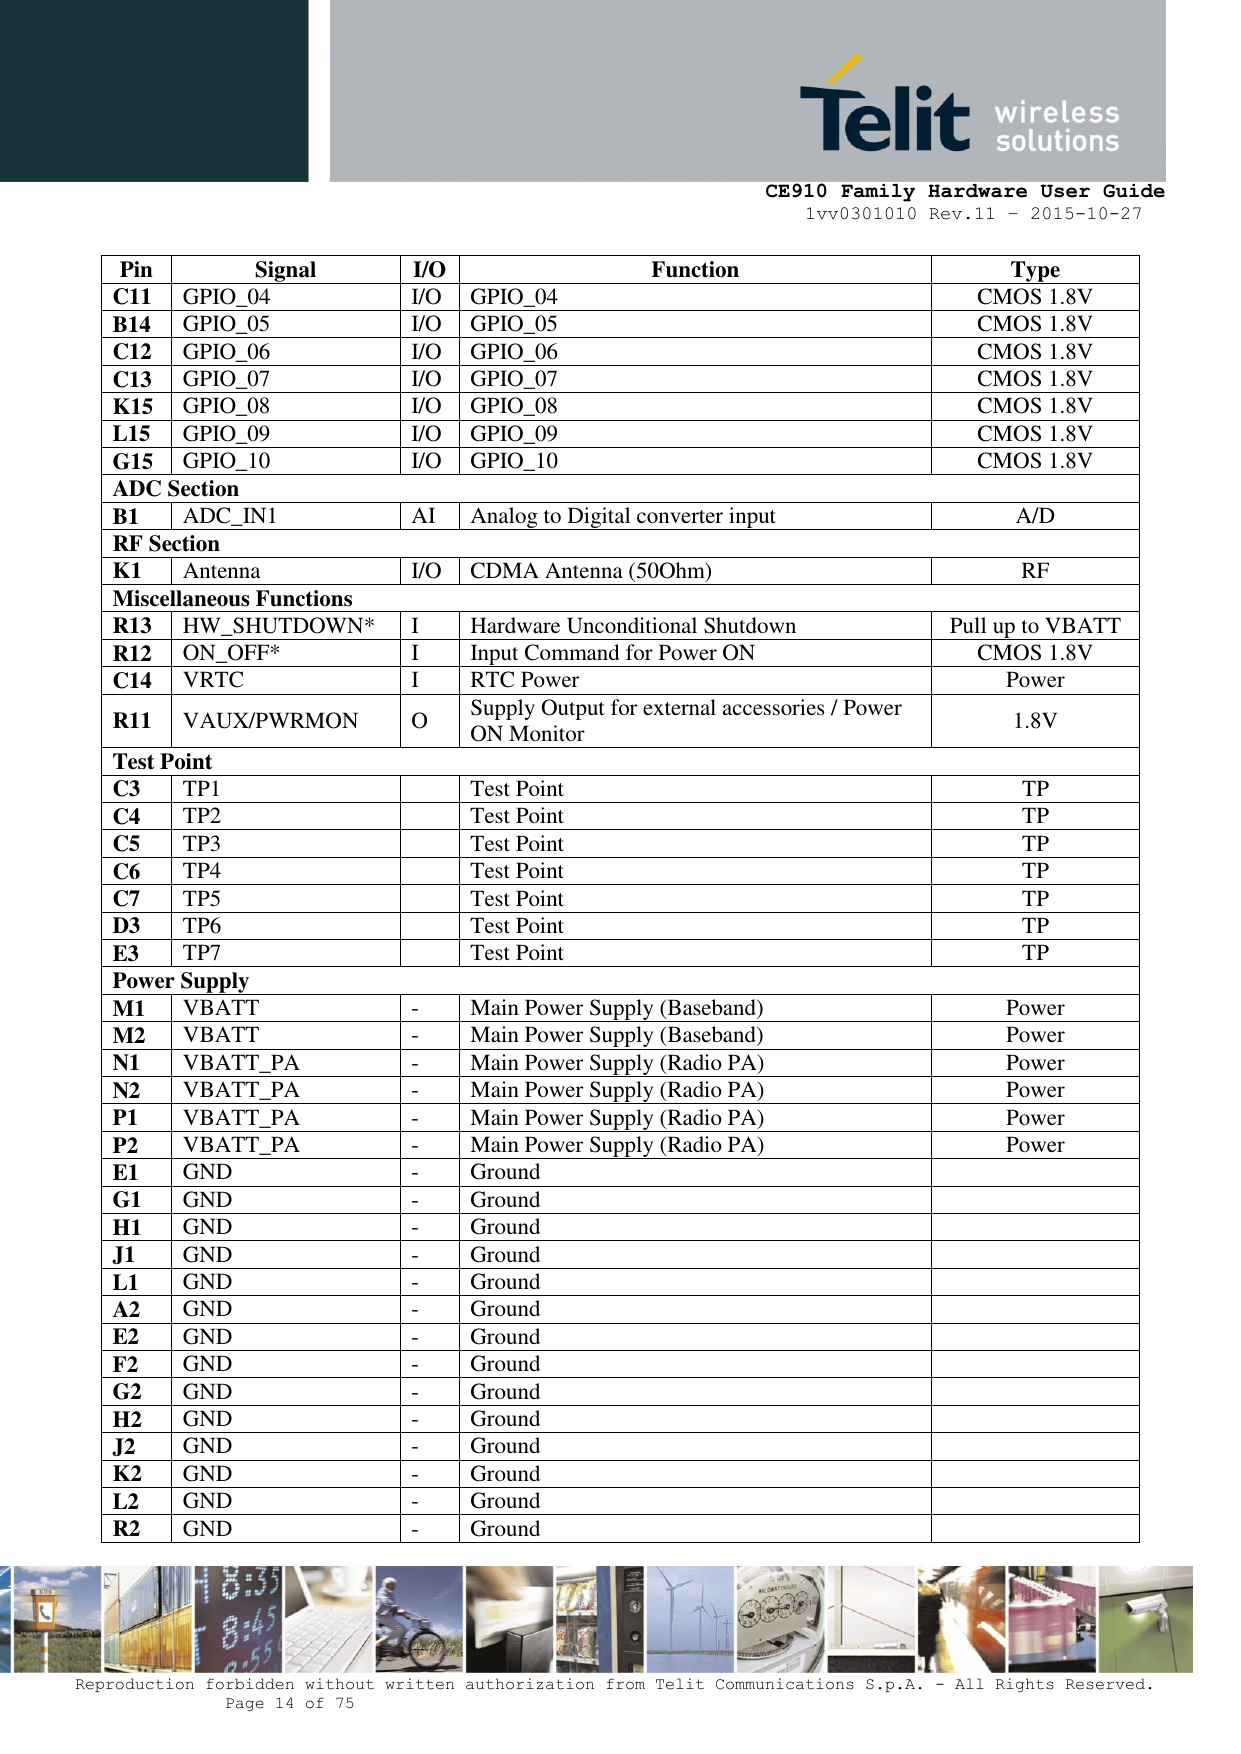     CE910 Family Hardware User Guide 1vv0301010 Rev.11 – 2015-10-27 Reproduction forbidden without written authorization from Telit Communications S.p.A. - All Rights Reserved.    Page 14 of 75                                                     Pin Signal I/O Function Type C11 GPIO_04 I/O GPIO_04 CMOS 1.8V B14 GPIO_05 I/O GPIO_05 CMOS 1.8V C12 GPIO_06 I/O GPIO_06 CMOS 1.8V C13 GPIO_07 I/O GPIO_07 CMOS 1.8V K15 GPIO_08 I/O GPIO_08 CMOS 1.8V L15 GPIO_09 I/O GPIO_09 CMOS 1.8V G15 GPIO_10 I/O GPIO_10 CMOS 1.8V ADC Section  B1 ADC_IN1 AI Analog to Digital converter input A/D RF Section K1 Antenna I/O CDMA Antenna (50Ohm) RF Miscellaneous Functions R13 HW_SHUTDOWN* I Hardware Unconditional Shutdown Pull up to VBATT R12 ON_OFF* I Input Command for Power ON CMOS 1.8V C14 VRTC I RTC Power Power R11 VAUX/PWRMON O Supply Output for external accessories / Power ON Monitor 1.8V Test Point C3 TP1  Test Point TP C4 TP2  Test Point TP C5 TP3  Test Point TP C6 TP4  Test Point TP C7 TP5  Test Point TP D3 TP6  Test Point TP E3 TP7  Test Point TP Power Supply M1 VBATT - Main Power Supply (Baseband) Power M2 VBATT - Main Power Supply (Baseband) Power N1 VBATT_PA - Main Power Supply (Radio PA) Power N2 VBATT_PA - Main Power Supply (Radio PA) Power P1 VBATT_PA - Main Power Supply (Radio PA) Power P2 VBATT_PA - Main Power Supply (Radio PA) Power E1 GND - Ground  G1 GND - Ground  H1 GND - Ground  J1 GND - Ground  L1 GND - Ground  A2 GND - Ground  E2 GND - Ground  F2 GND - Ground  G2 GND - Ground  H2 GND - Ground  J2 GND - Ground  K2 GND - Ground  L2 GND - Ground  R2 GND - Ground  